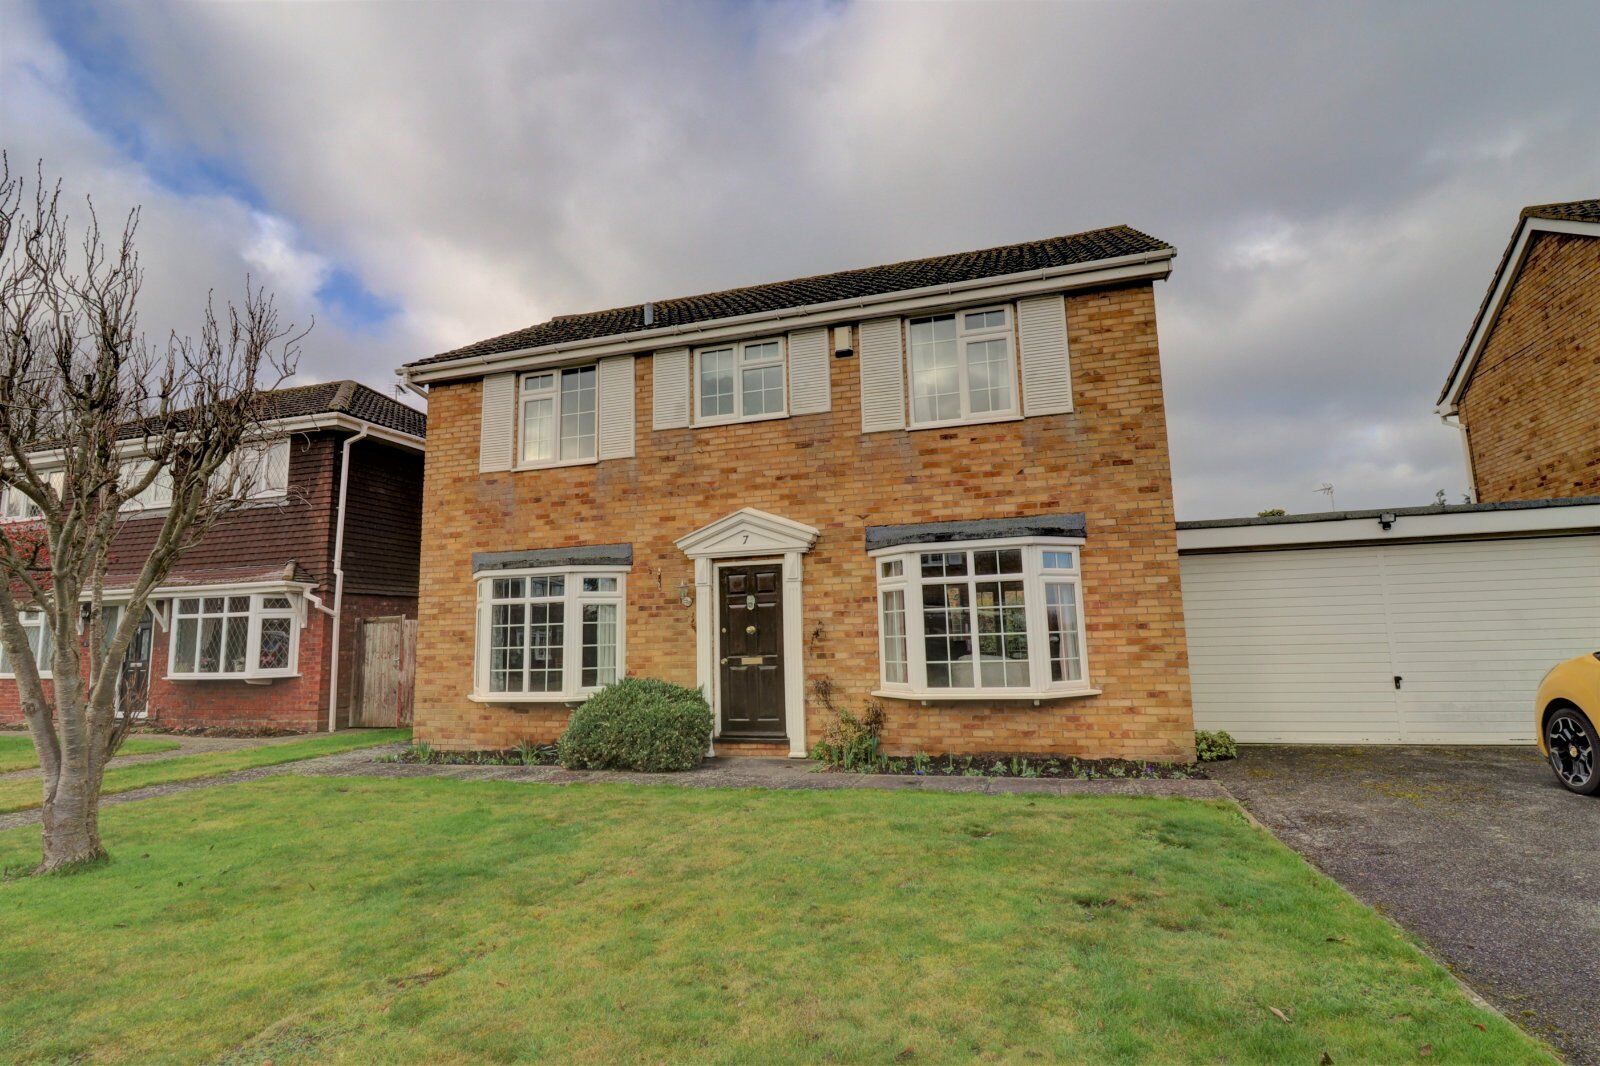 4 bedroom detached house for sale Blacksmiths Road, Longwick, HP27, main image